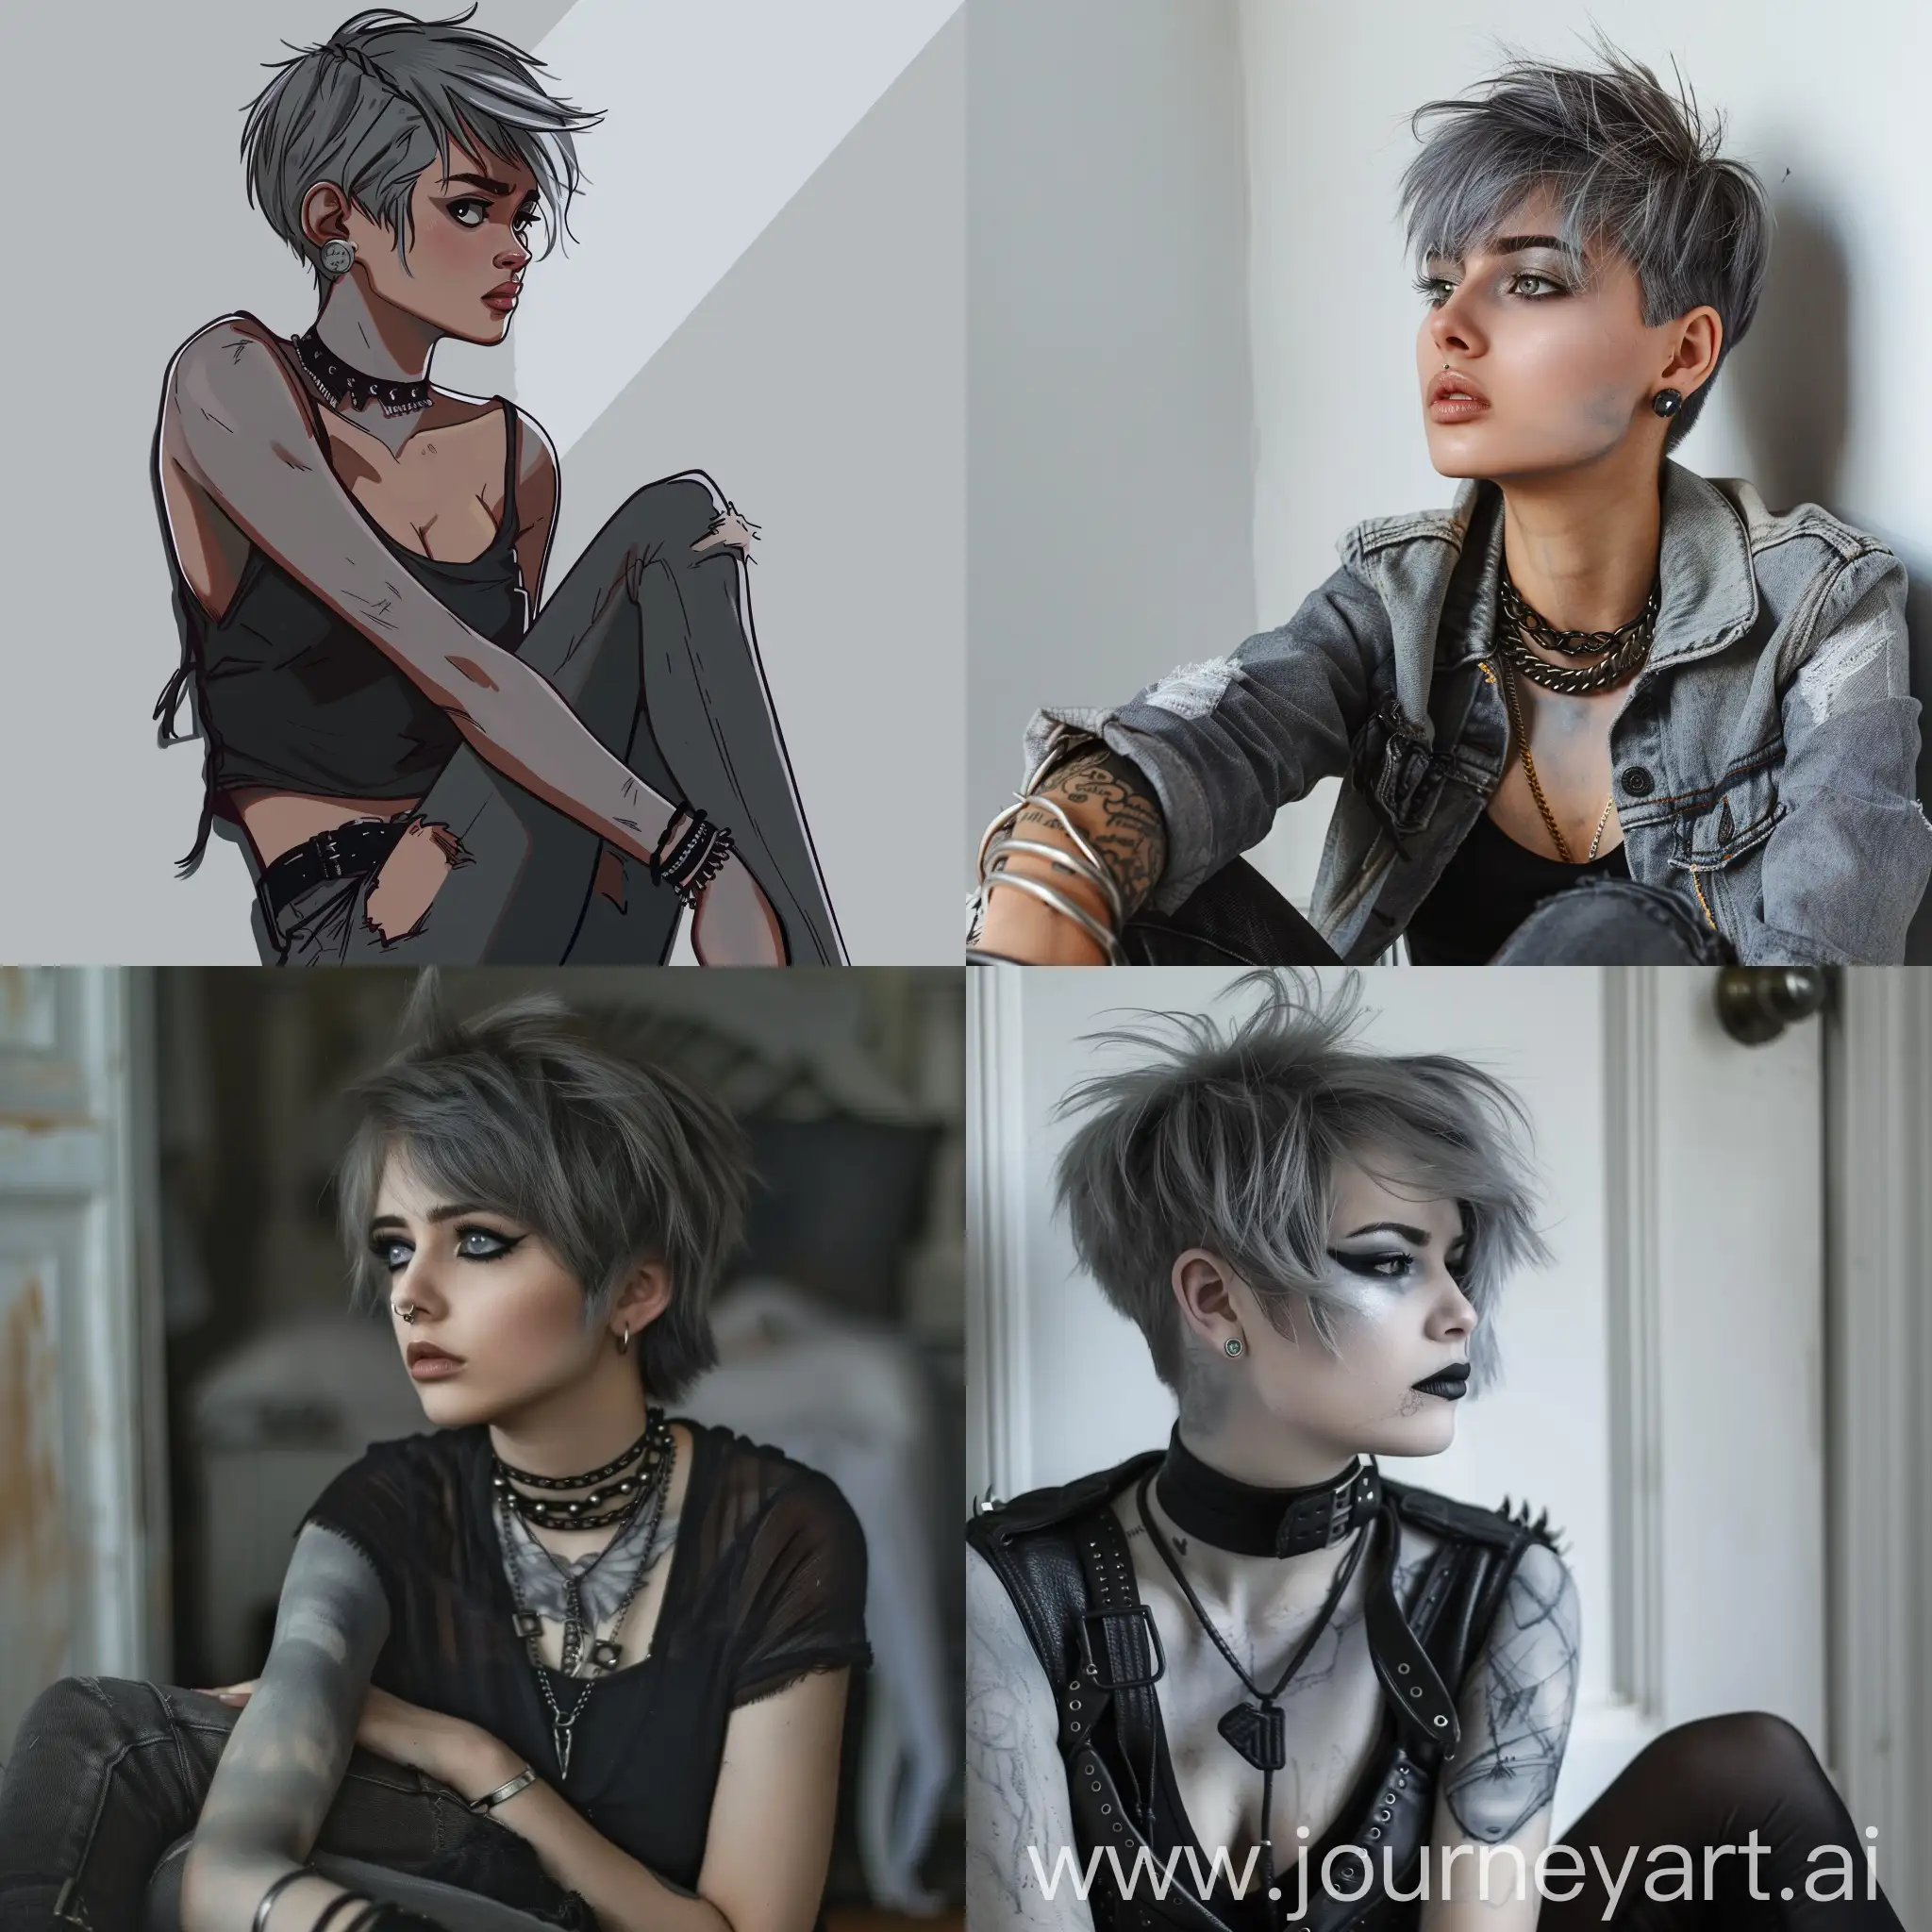  Punk girl with short gray hair and gray skin sits aside and wonders